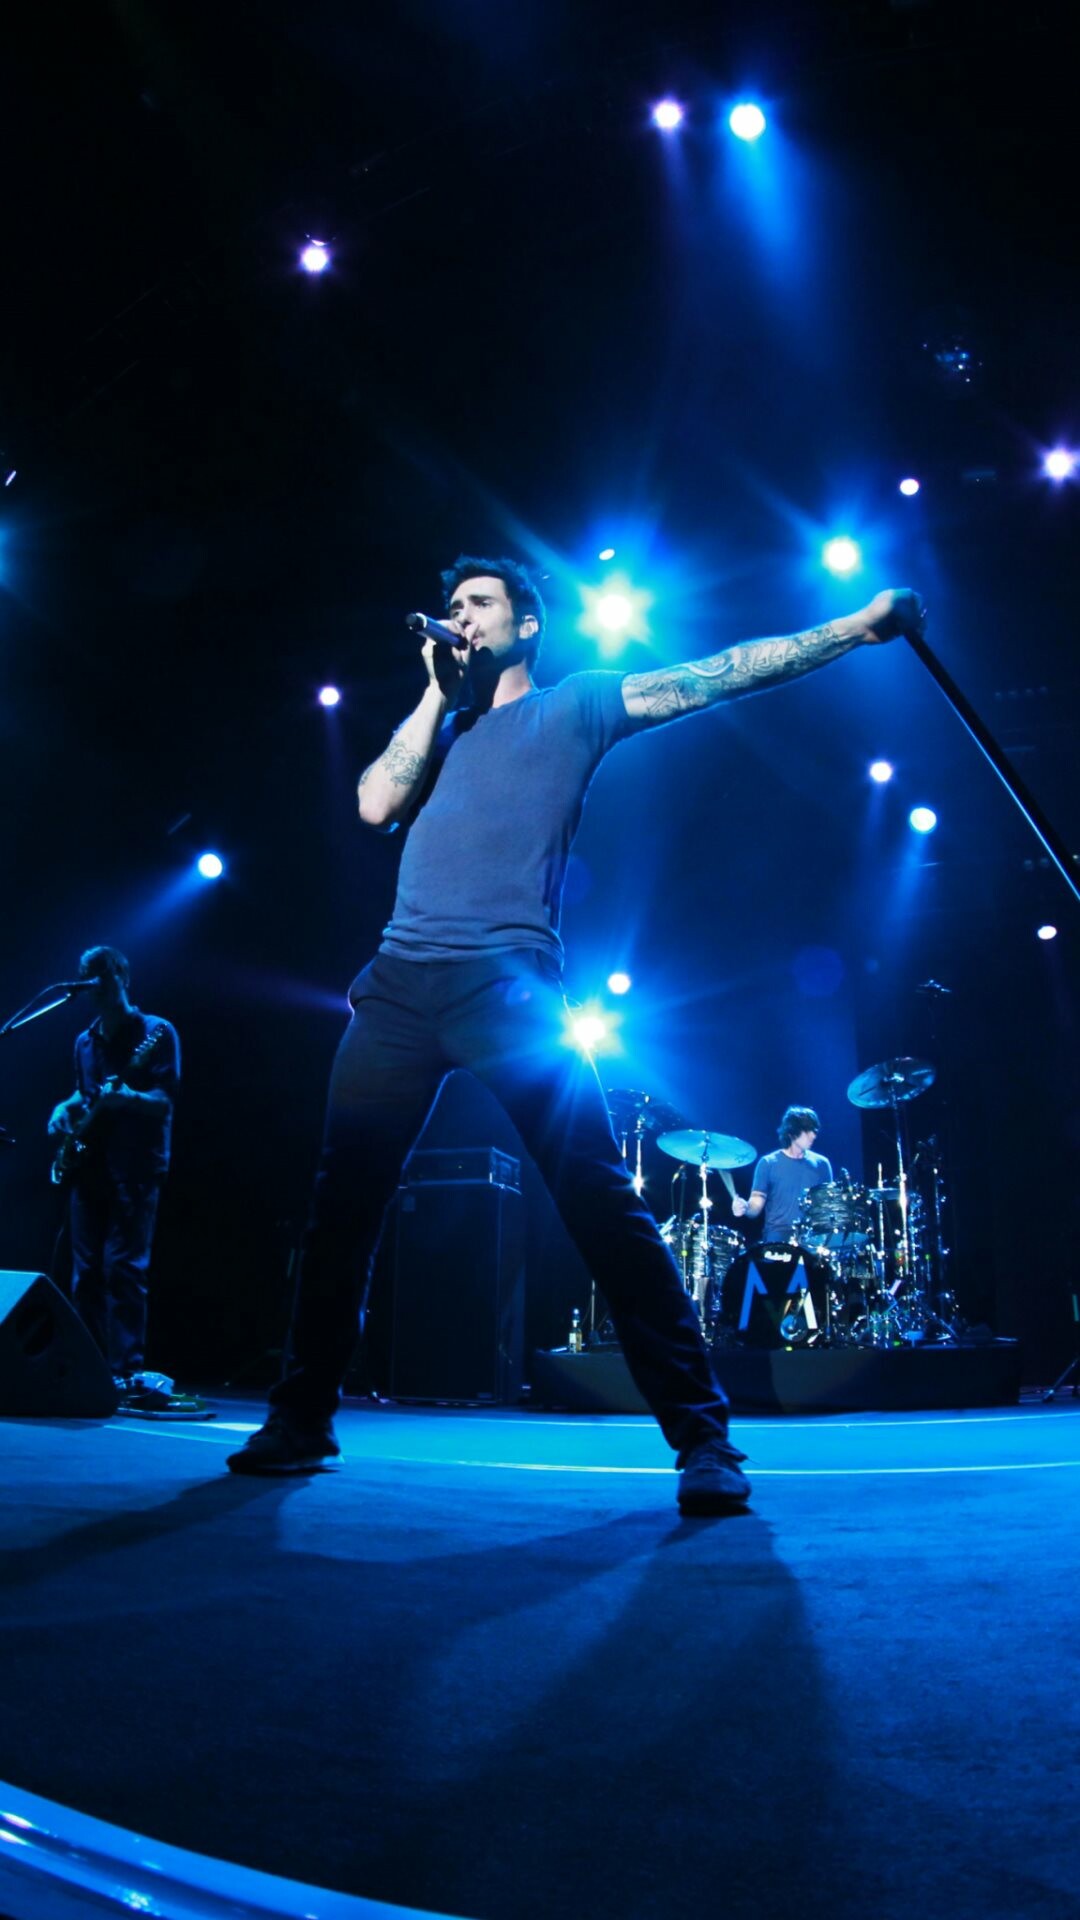 Maroon 5, Free download, Dynamic wallpapers, iPhone exclusivity, 1080x1920 Full HD Handy